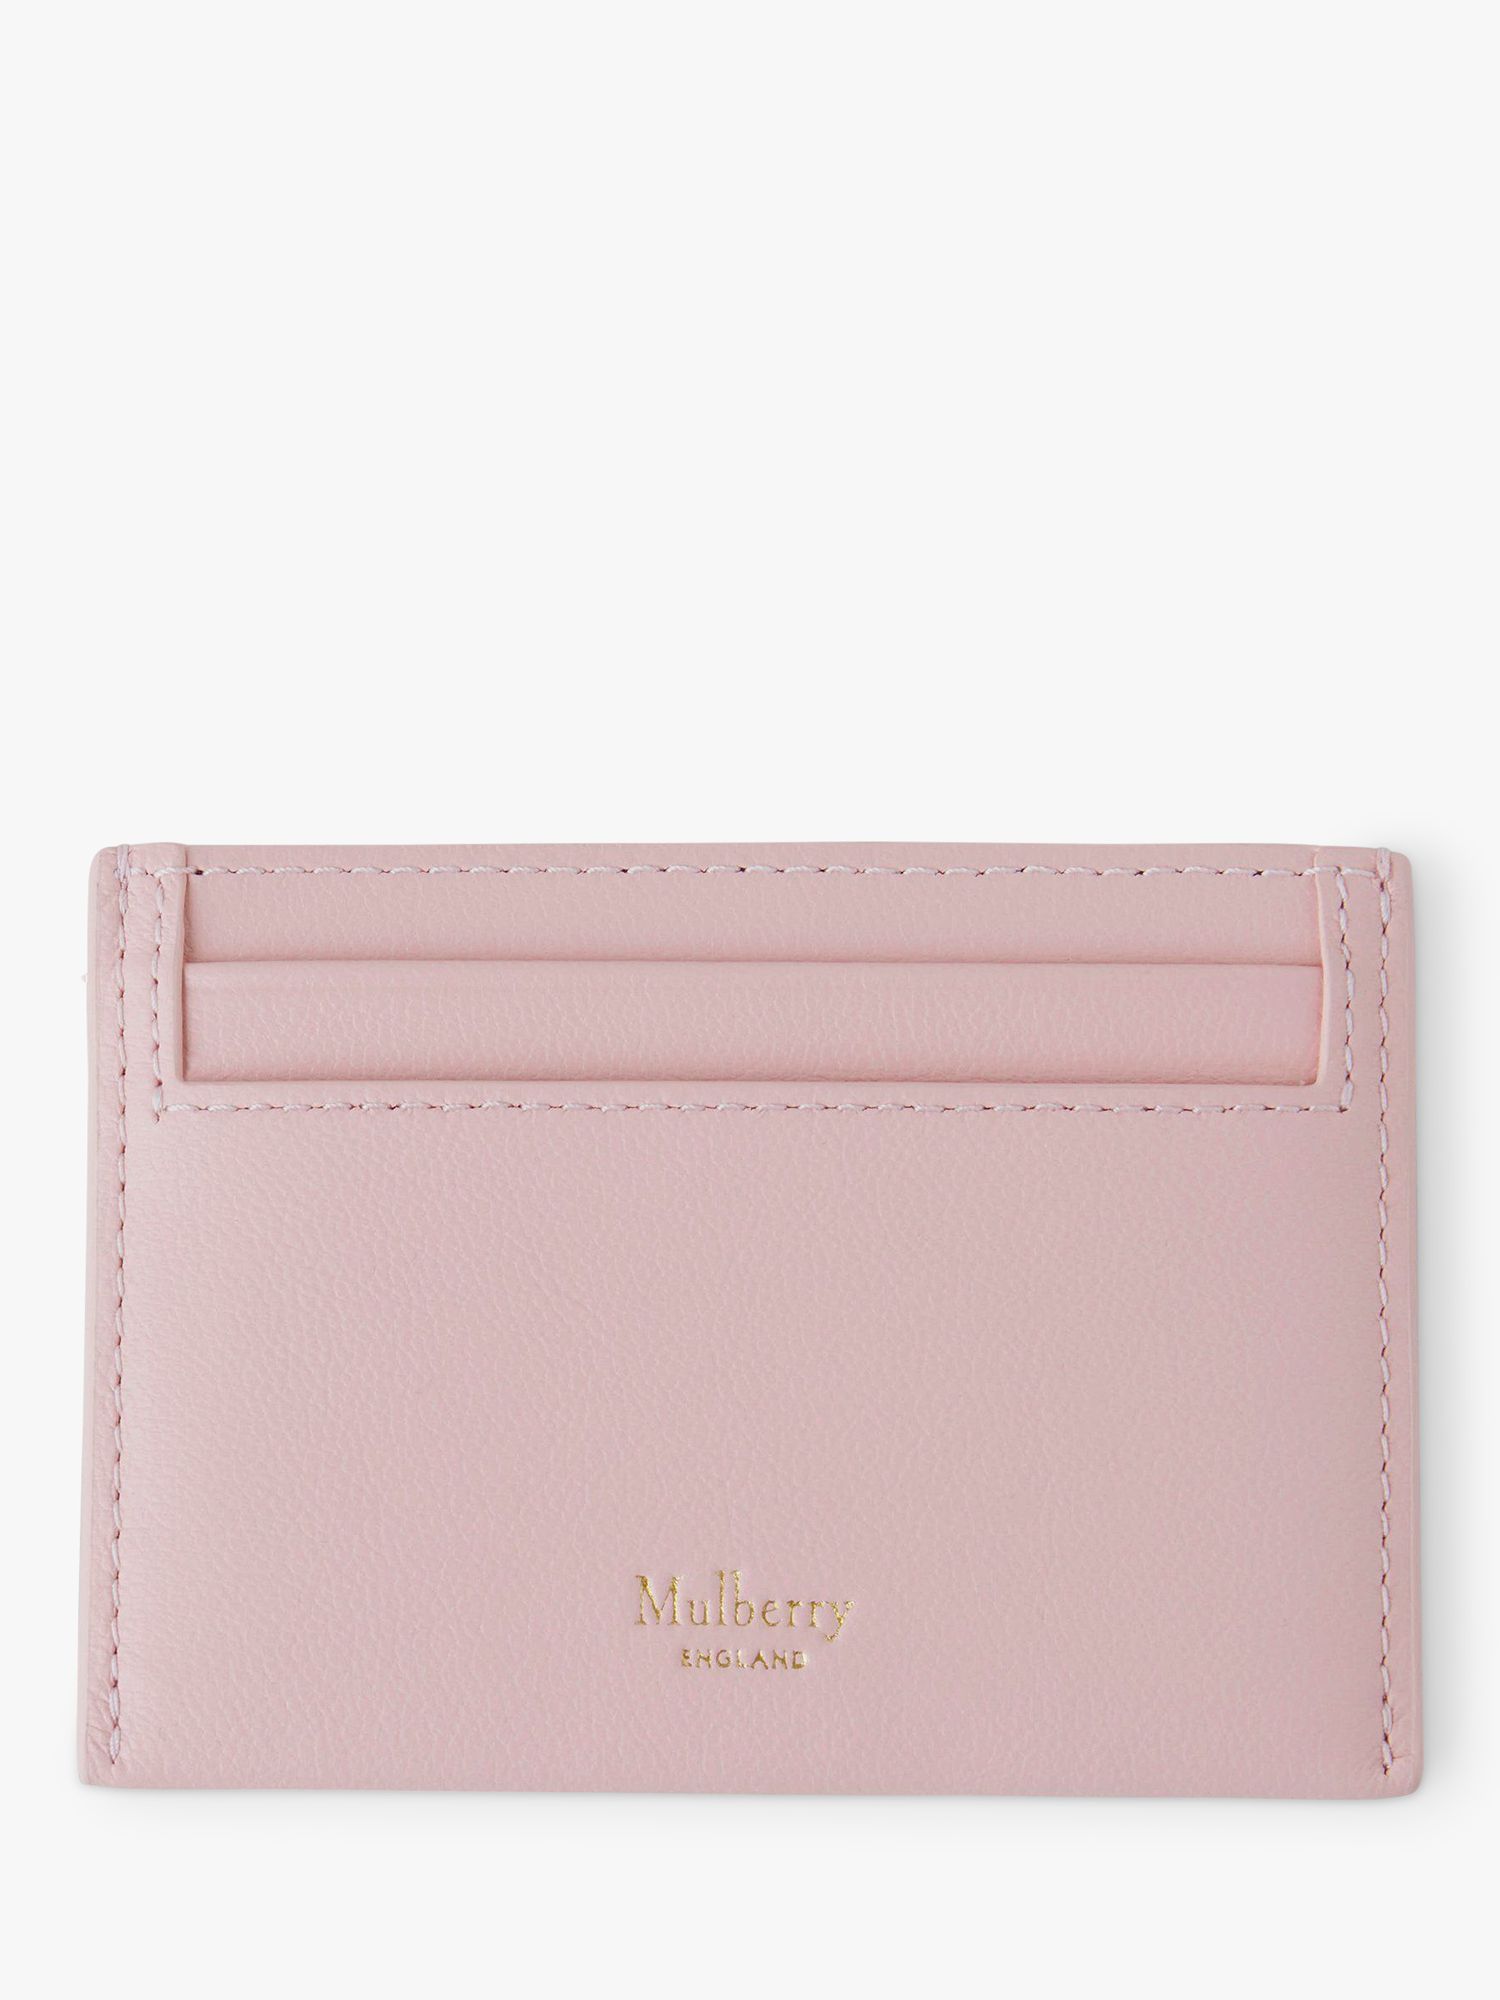 Buy Mulberry Continental Micro Classic Grain Card Slip Online at johnlewis.com